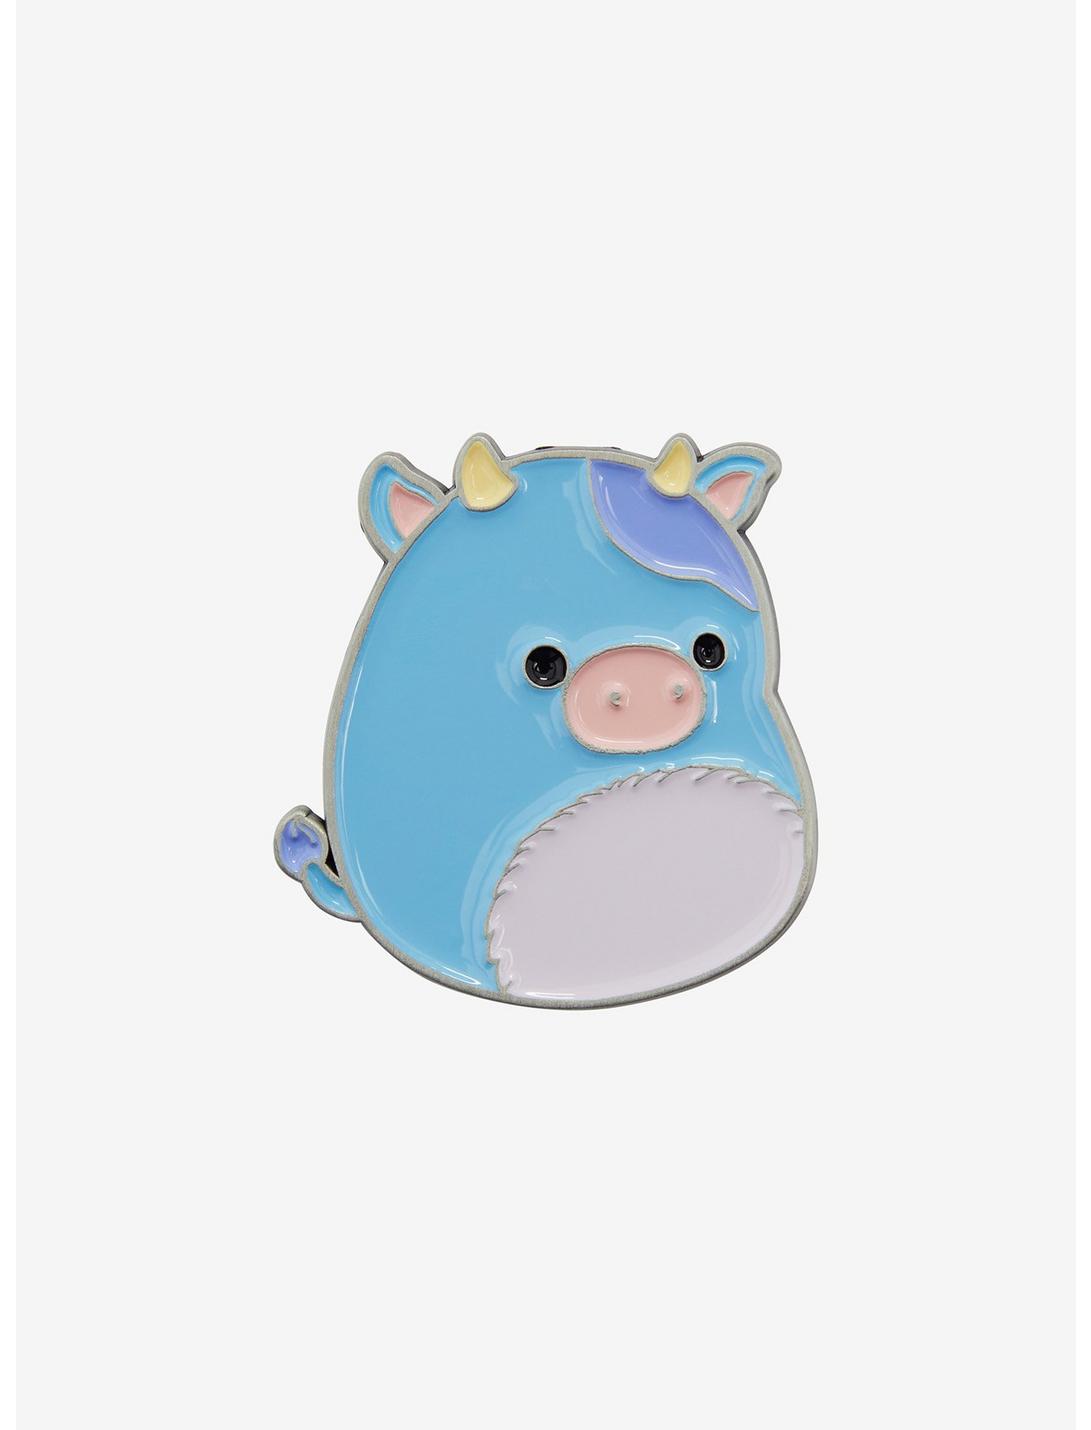 Squishmallows Clayton the Cow Enamel Pin - BoxLunch Exclusive, , hi-res